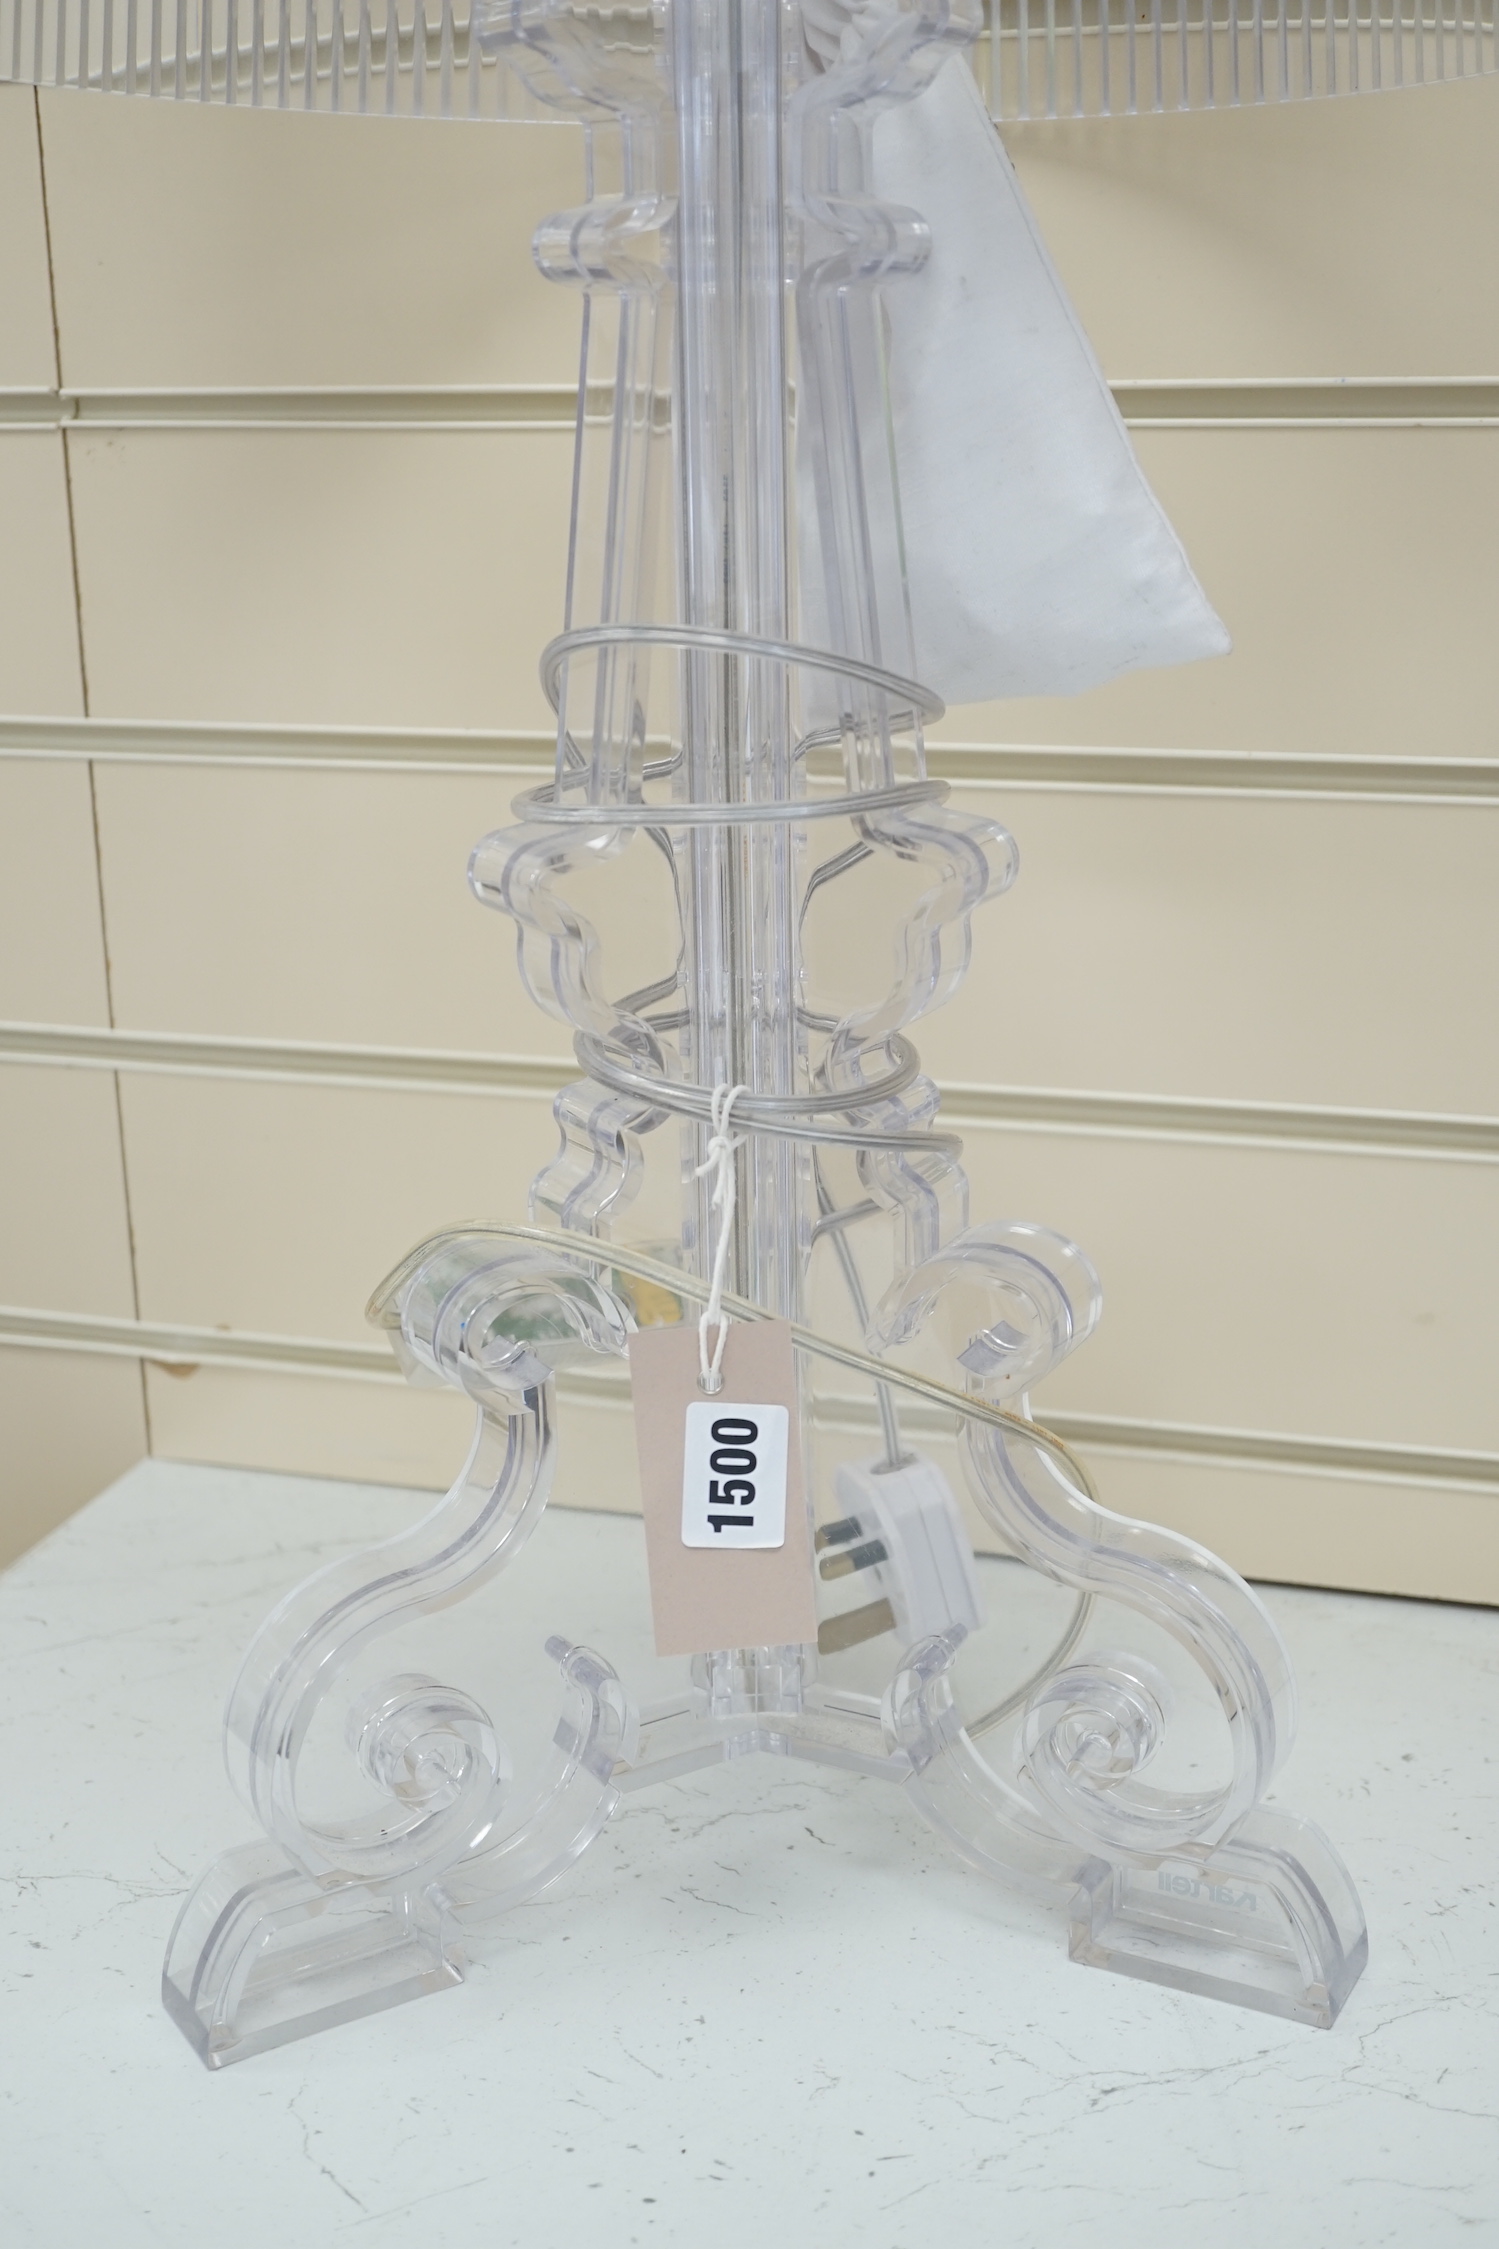 A pair of Bourgie table lamps by Kartell, clear polycarbonate, with original adjustable shades, 69cm high including shades